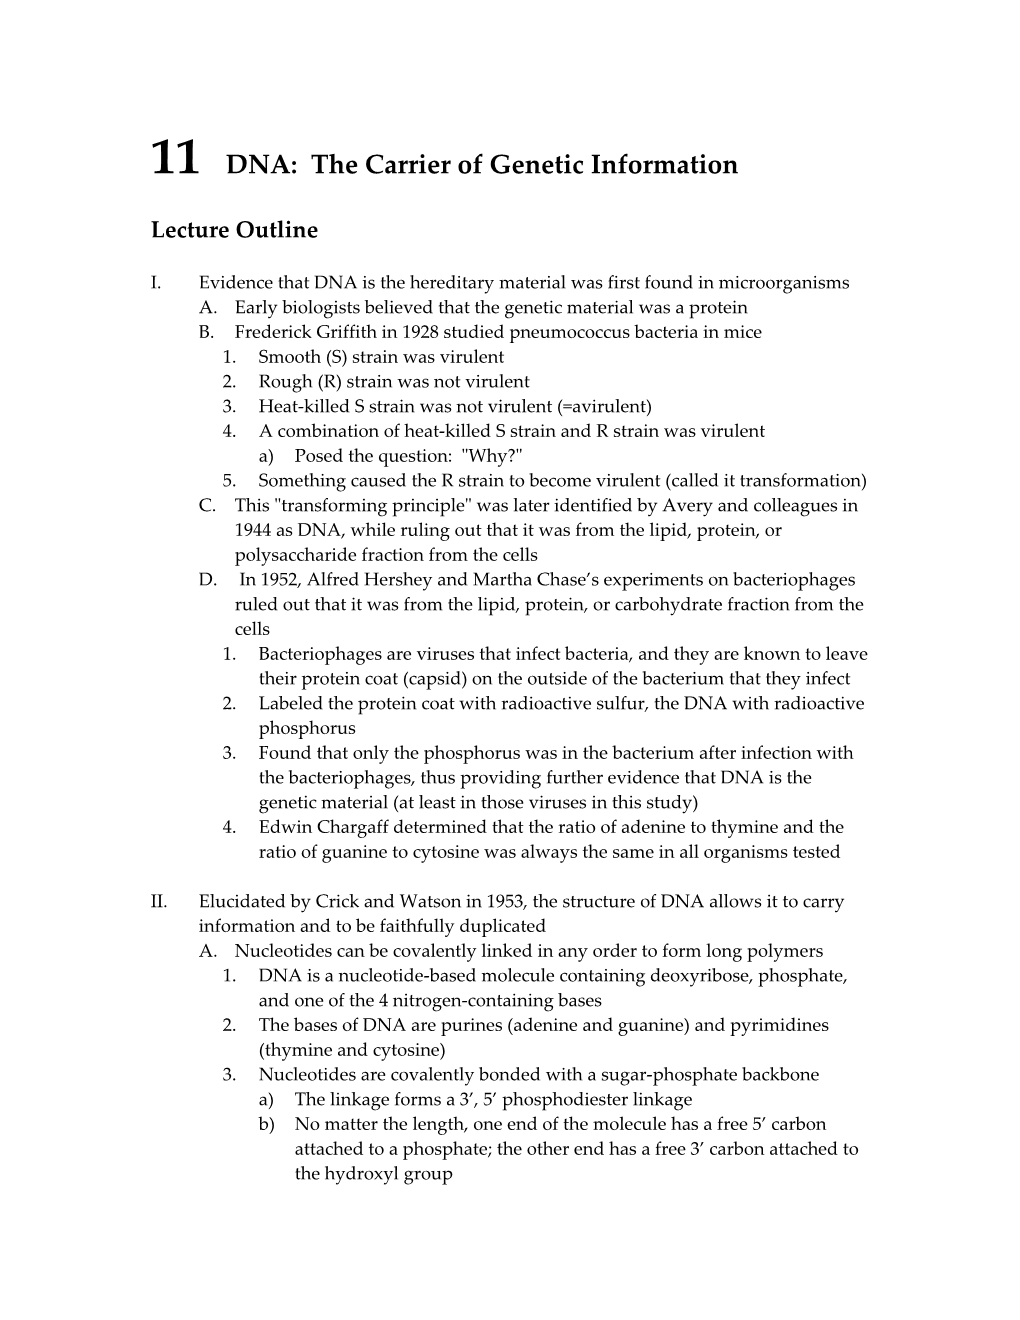 11DNA: the Carrier of Genetic Information